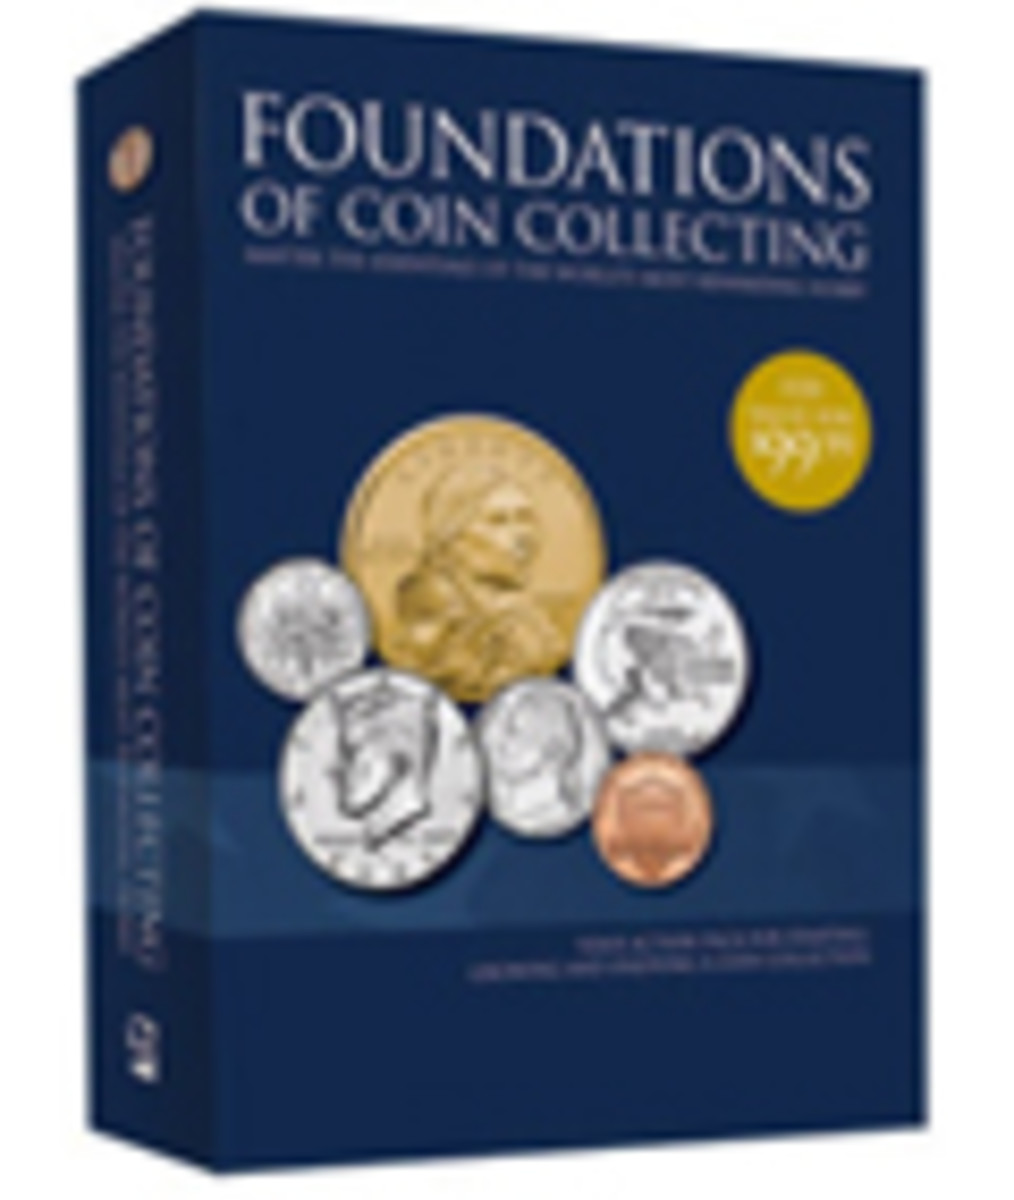 Foundations of Coin Collecting Master Box